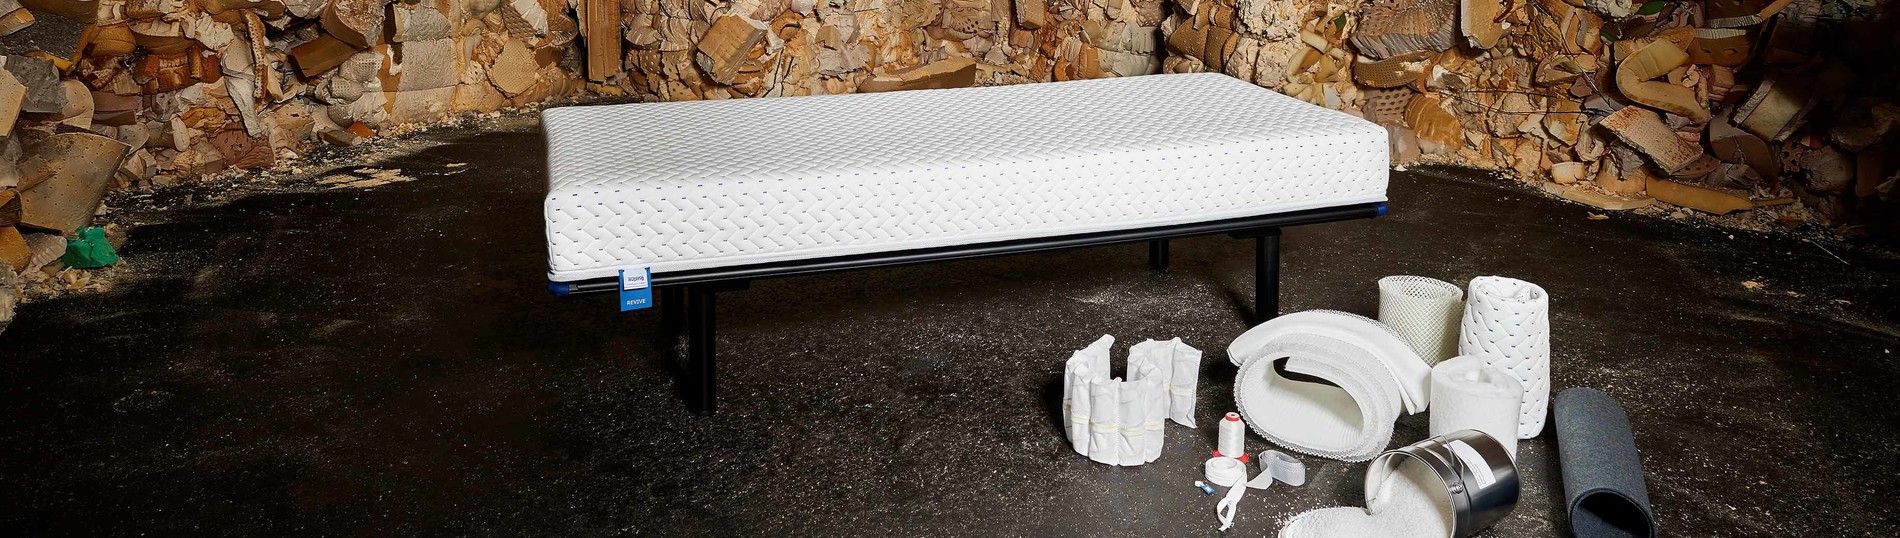 Royal Auping and Niaga® achieve breakthrough for fully recyclable mattress